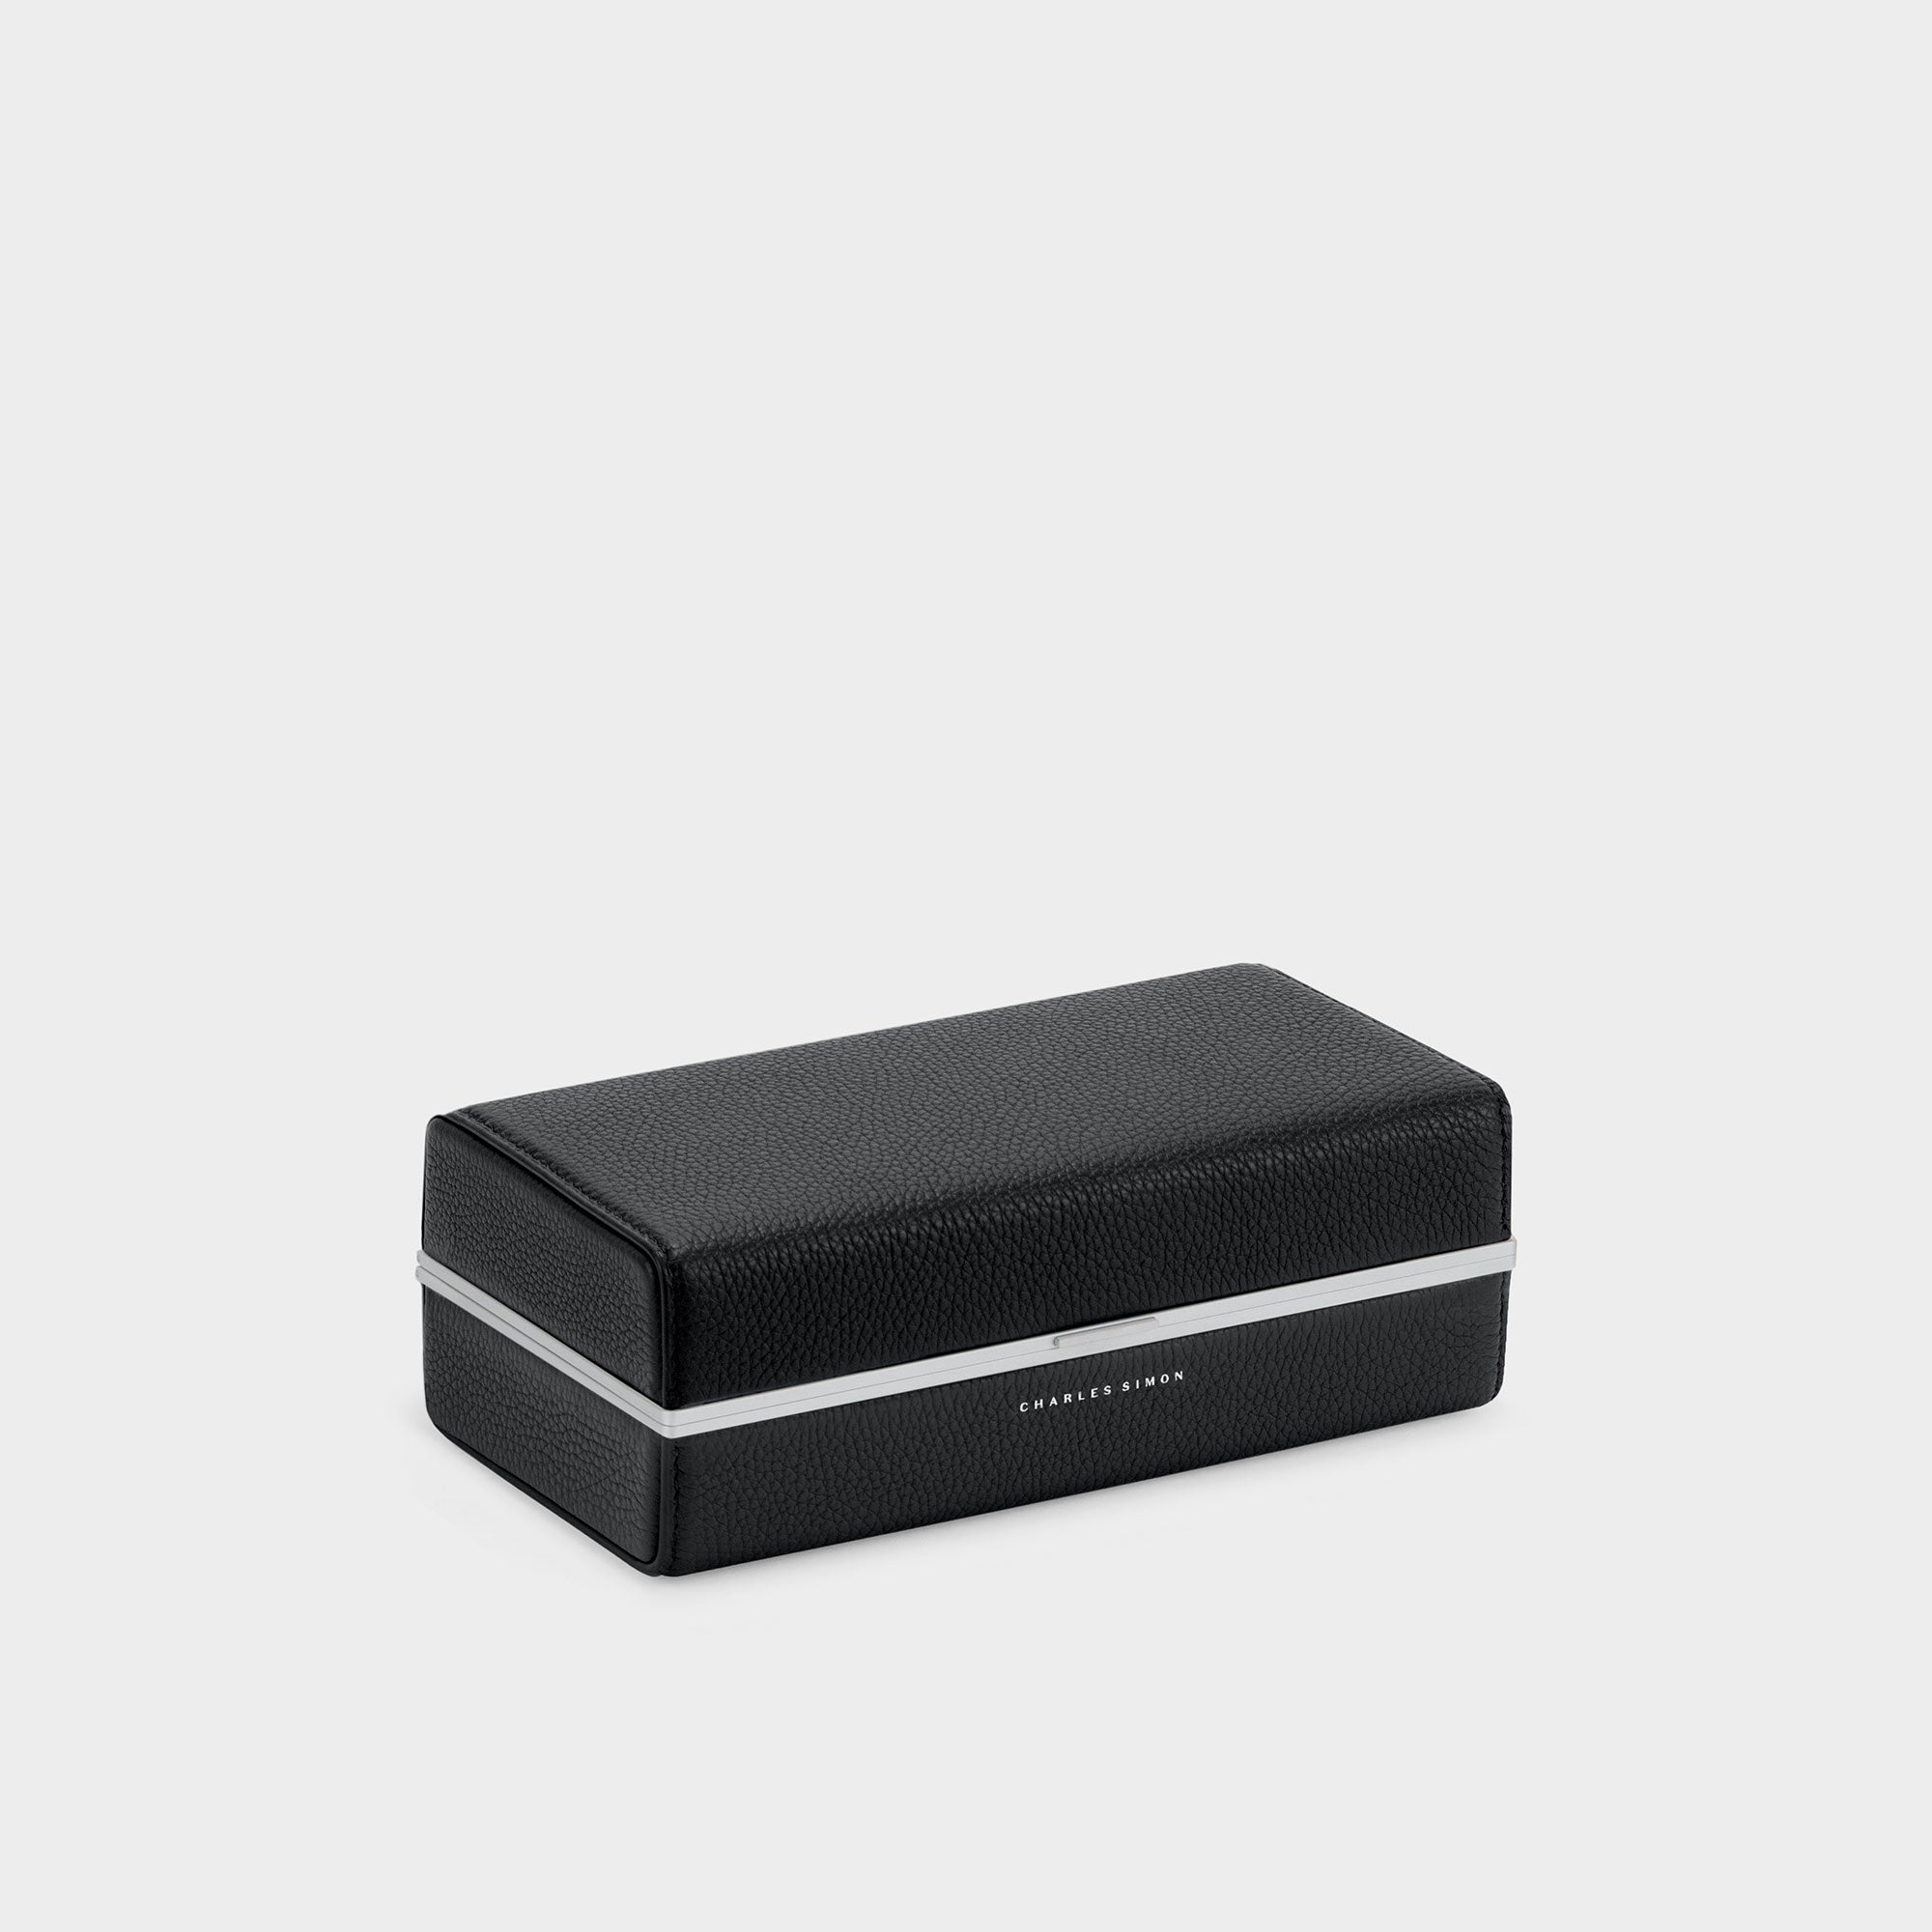 Charles Simon Moraine toiletry case in black leather and anodized aluminum closed view